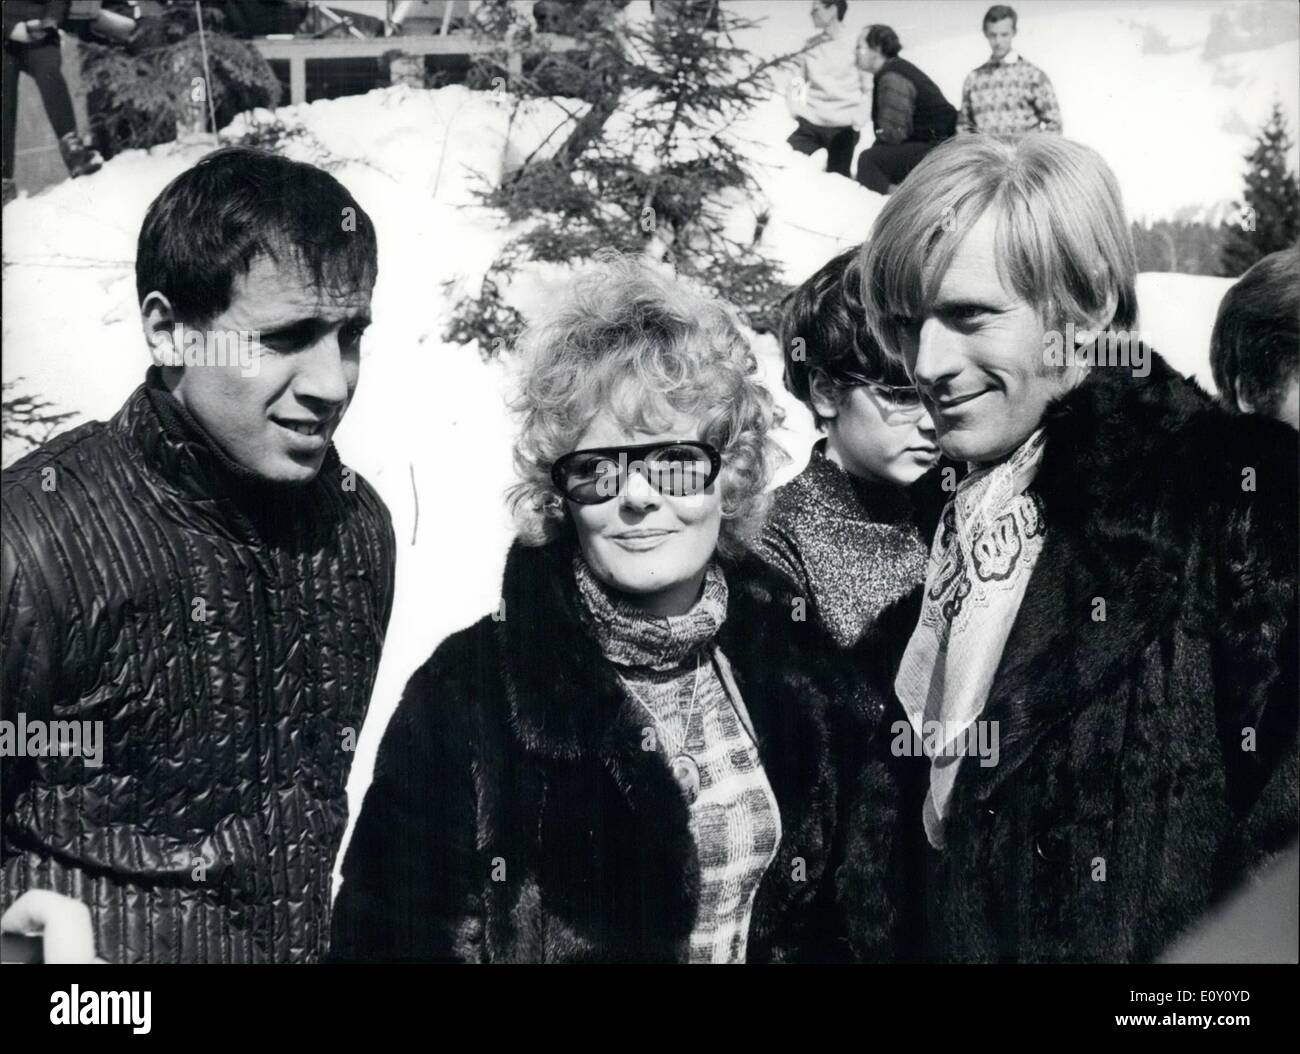 Mar. 03, 1968 - Winterly show in Laax, Switzerland - for Eurovision The first program of the Eurovision TV show ''Europeparty '' is being shot at the new Swiss Winter resort, Laax in Graubunden canton. Photo shows Adriano Celentano, Italian Can zone-Singer, Petula Clark, and french chansonnier ,Nino Ferrer. Stock Photo